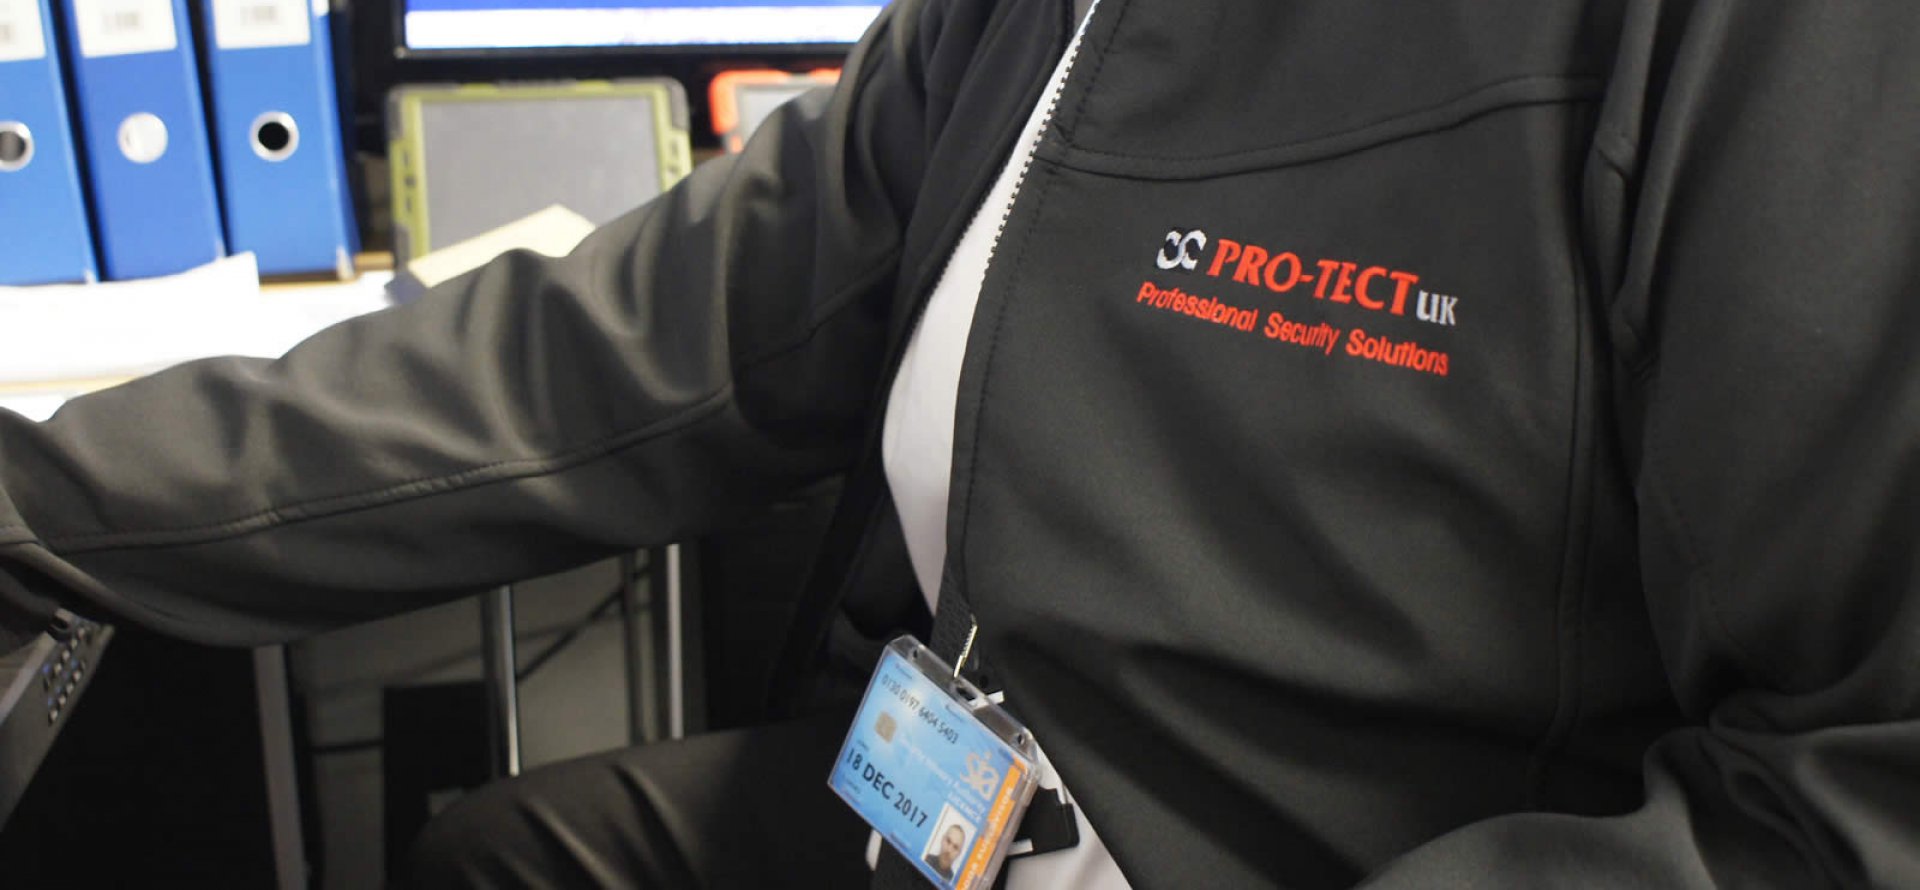 Contact Pro-Tect UK Security and Training